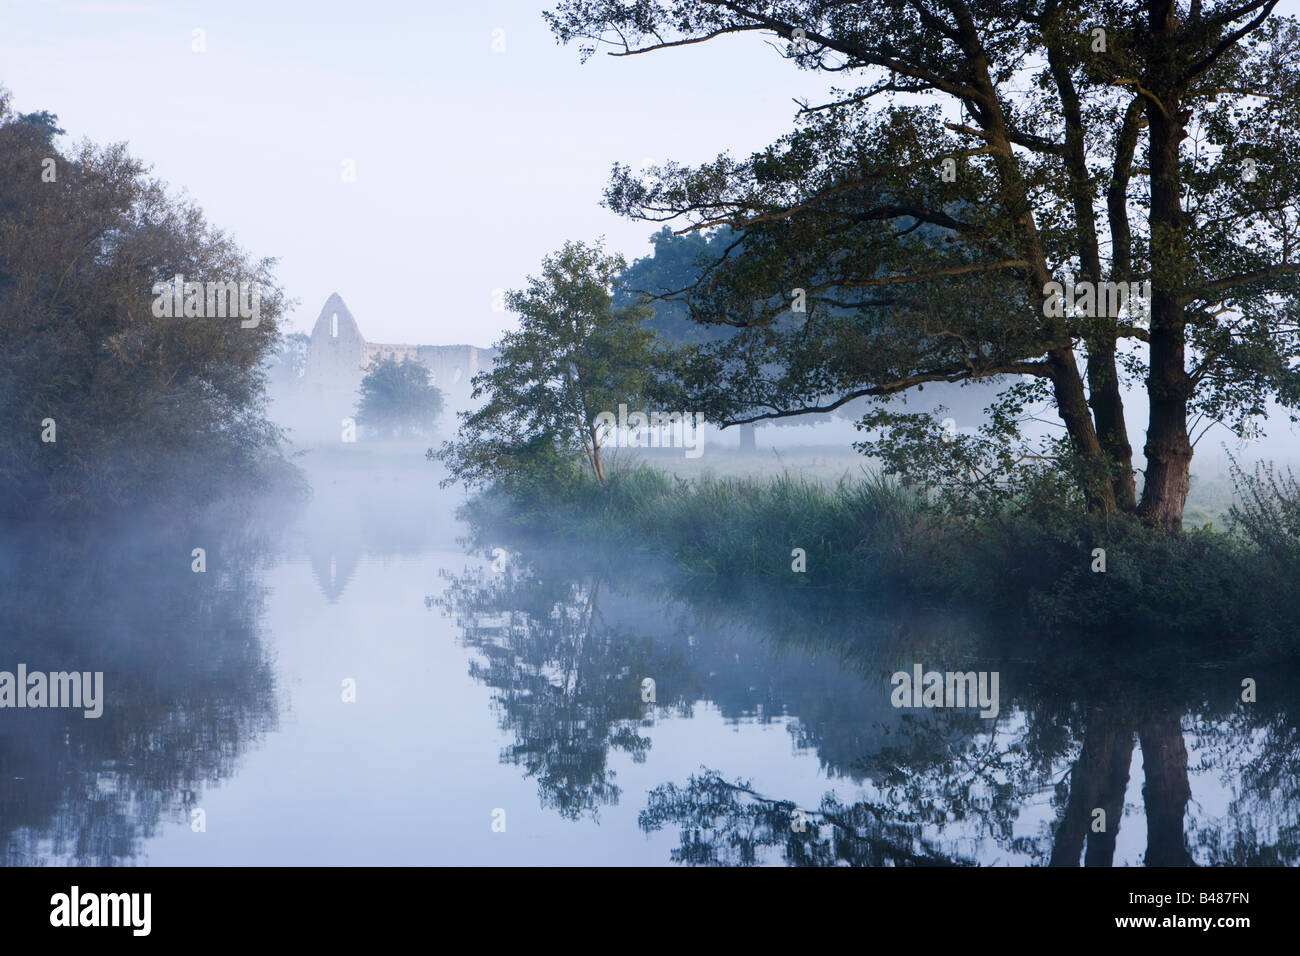 Newark Priory and River Wey, Pyrford, Surrey, UK. Misty dawn in early autumn. Stock Photo